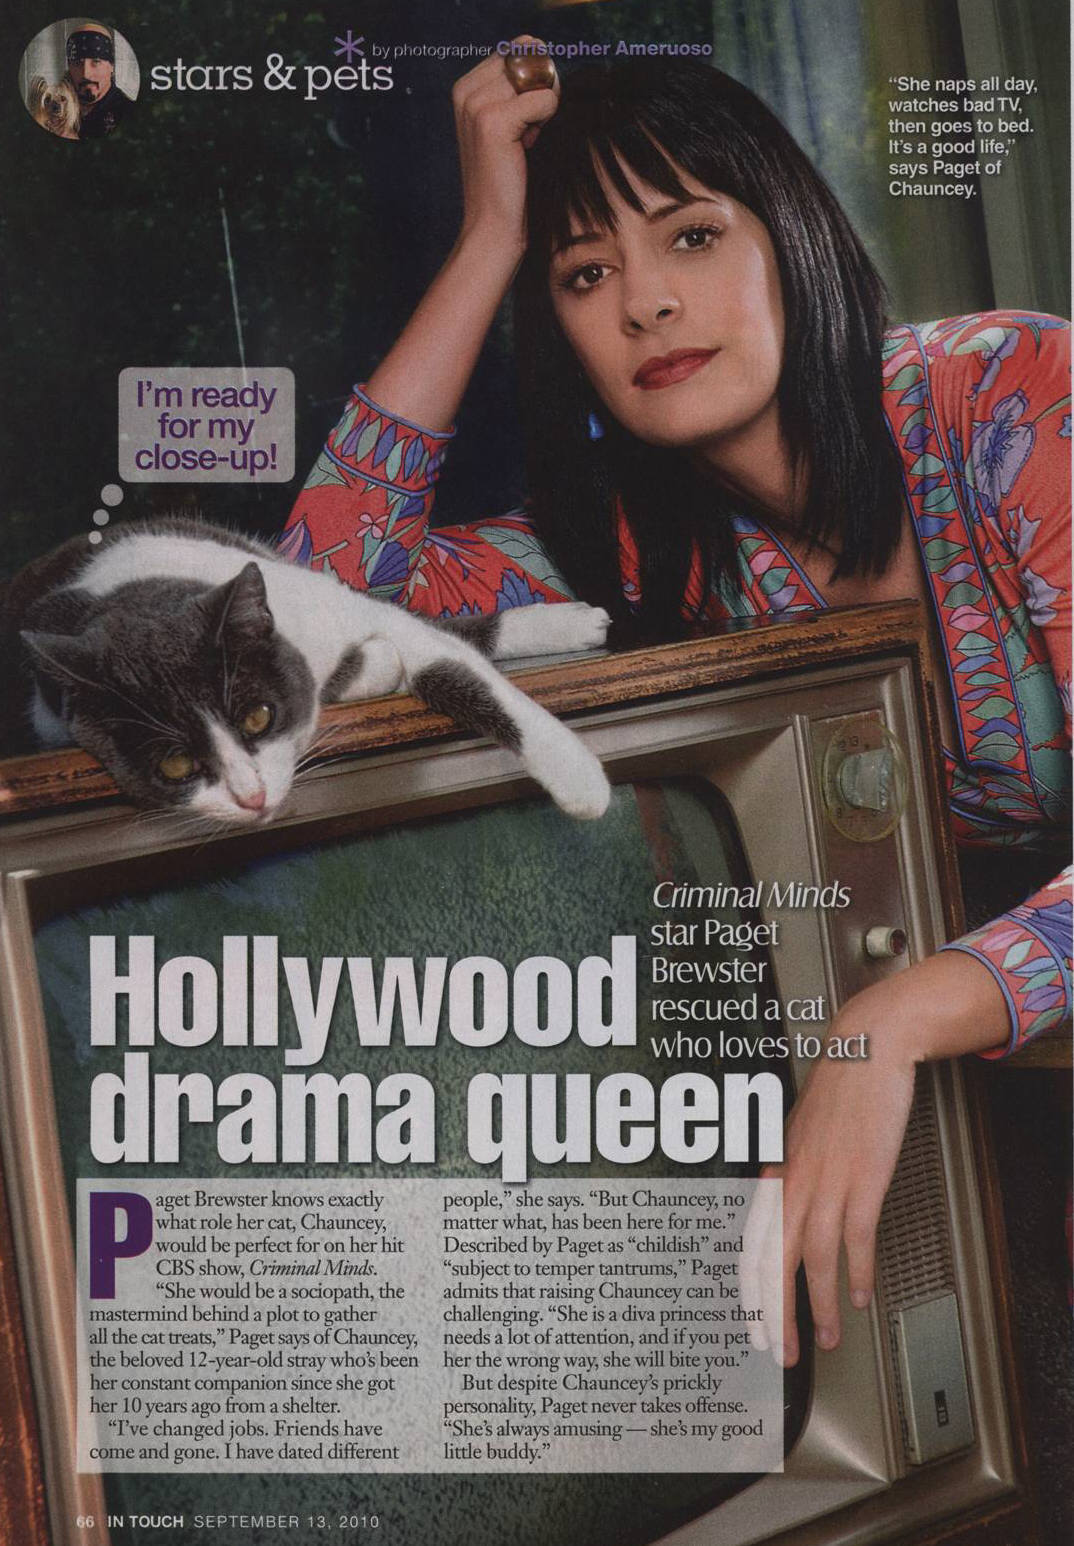 Paget and her Cat